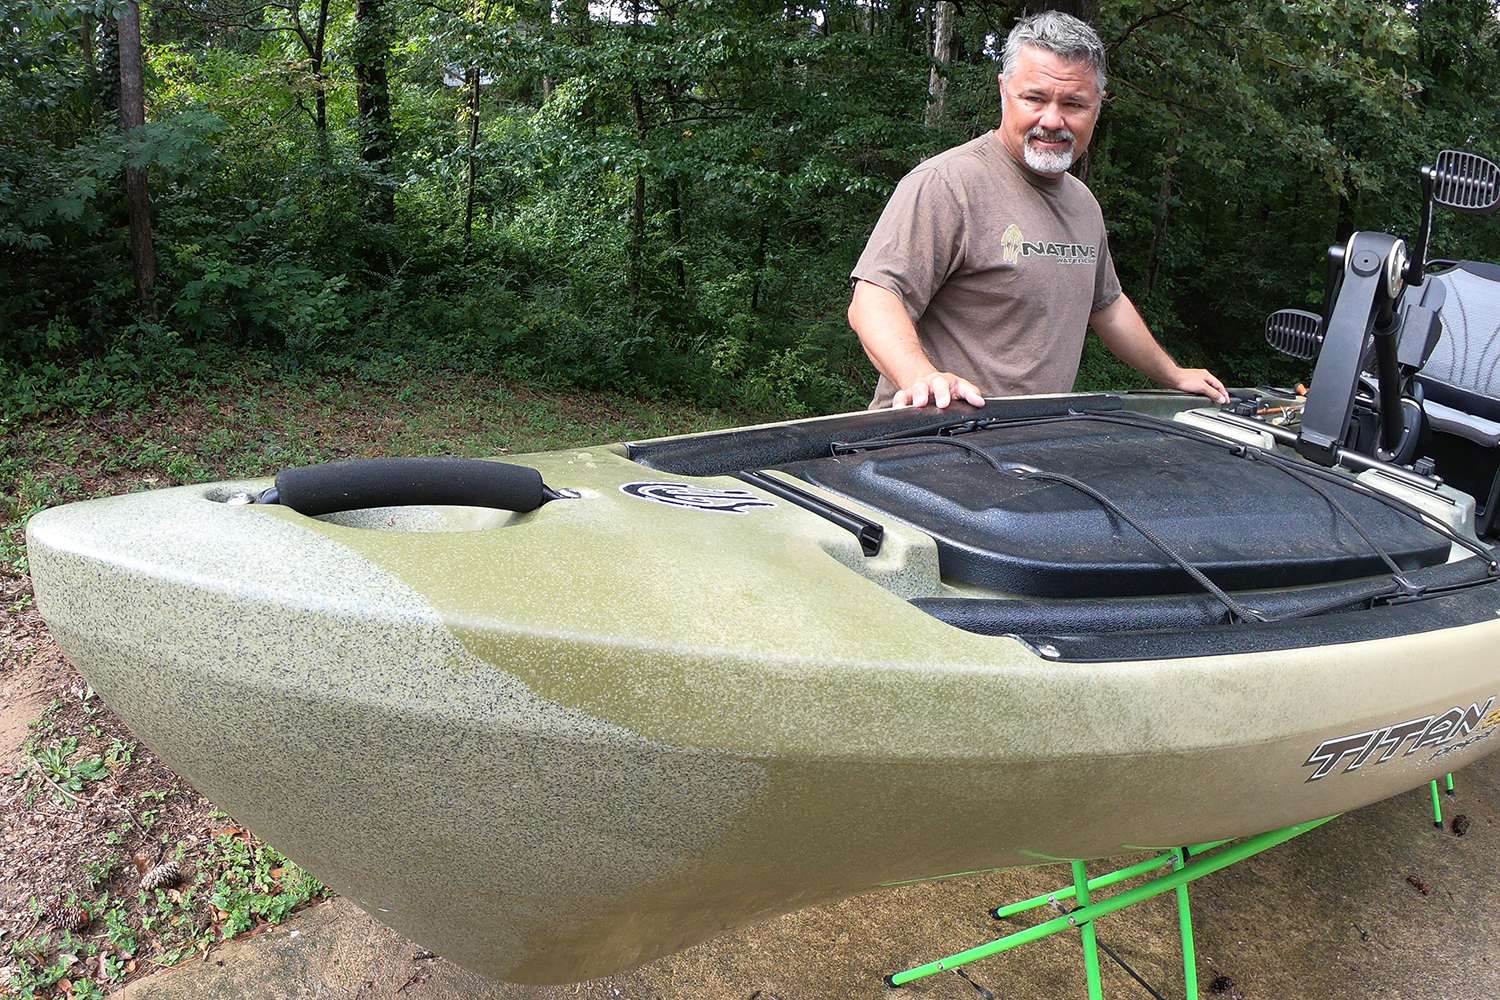 This fishing rig is more of a boat than a traditional kayak, but it is a fishing machine that is capable of carrying all the gear you could possibly need on a small-boat fishing trip. 